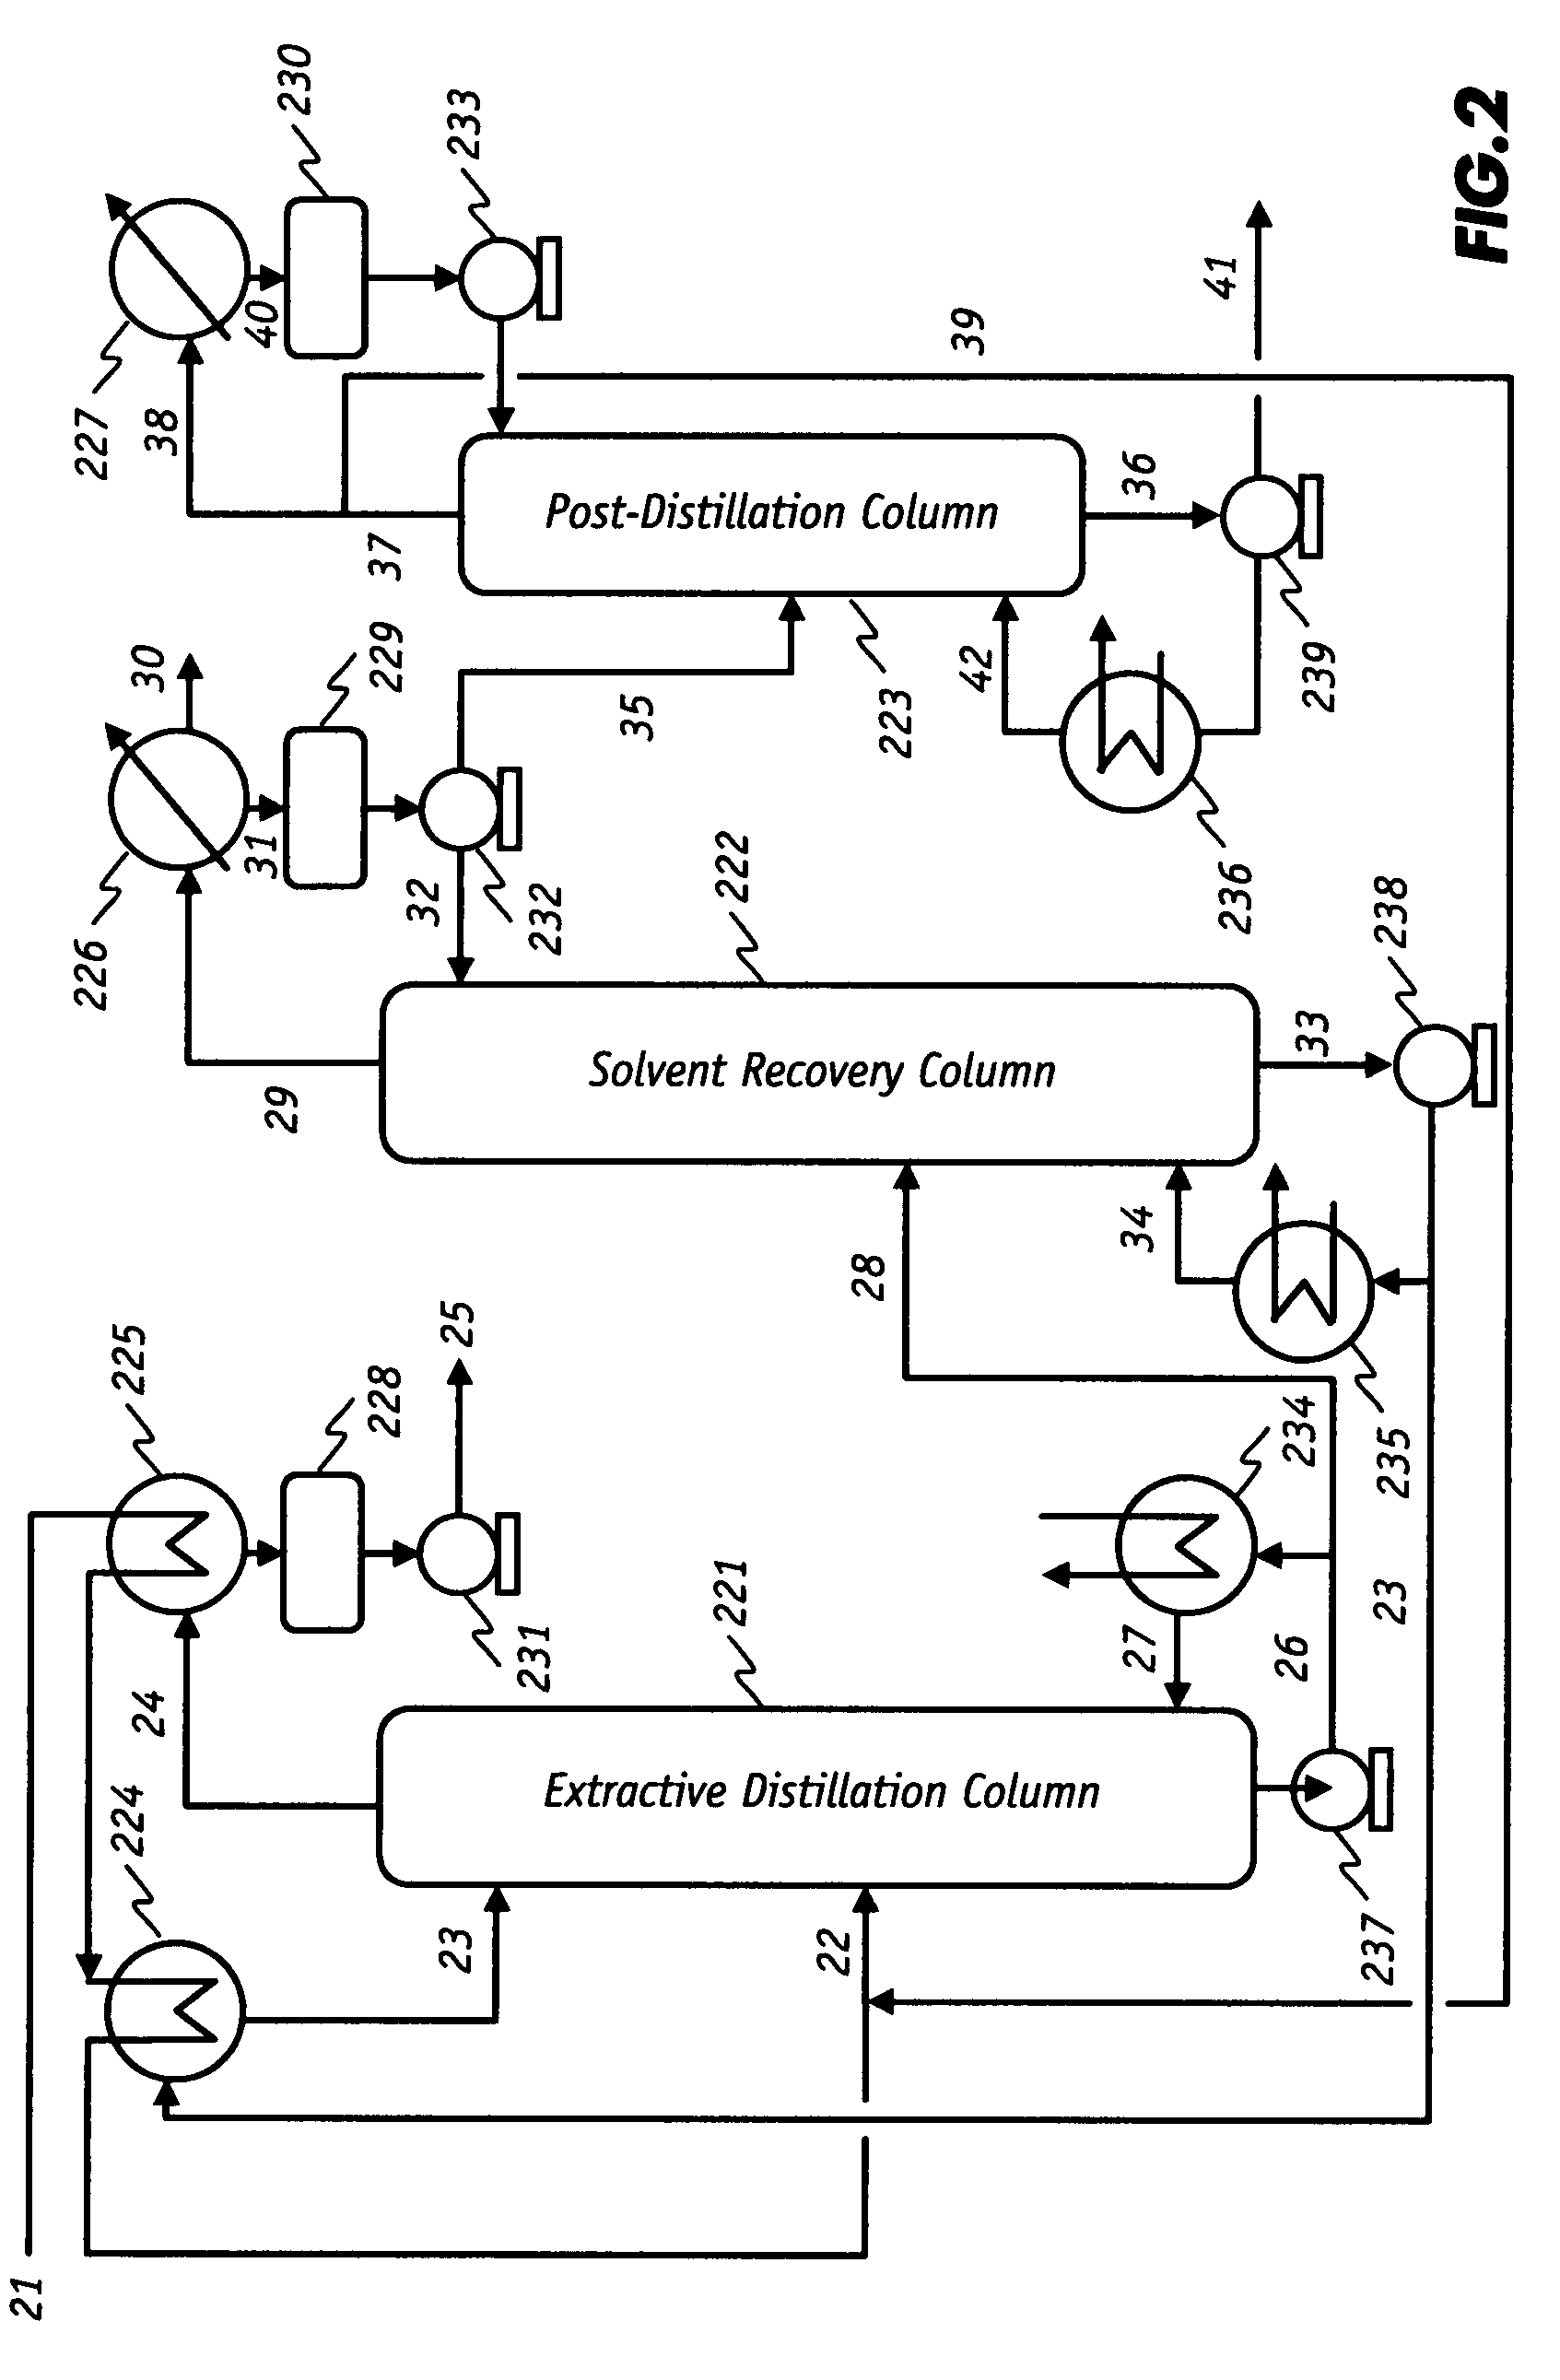 Low-energy extractive distillation process for dehydration of aqueous ethanol